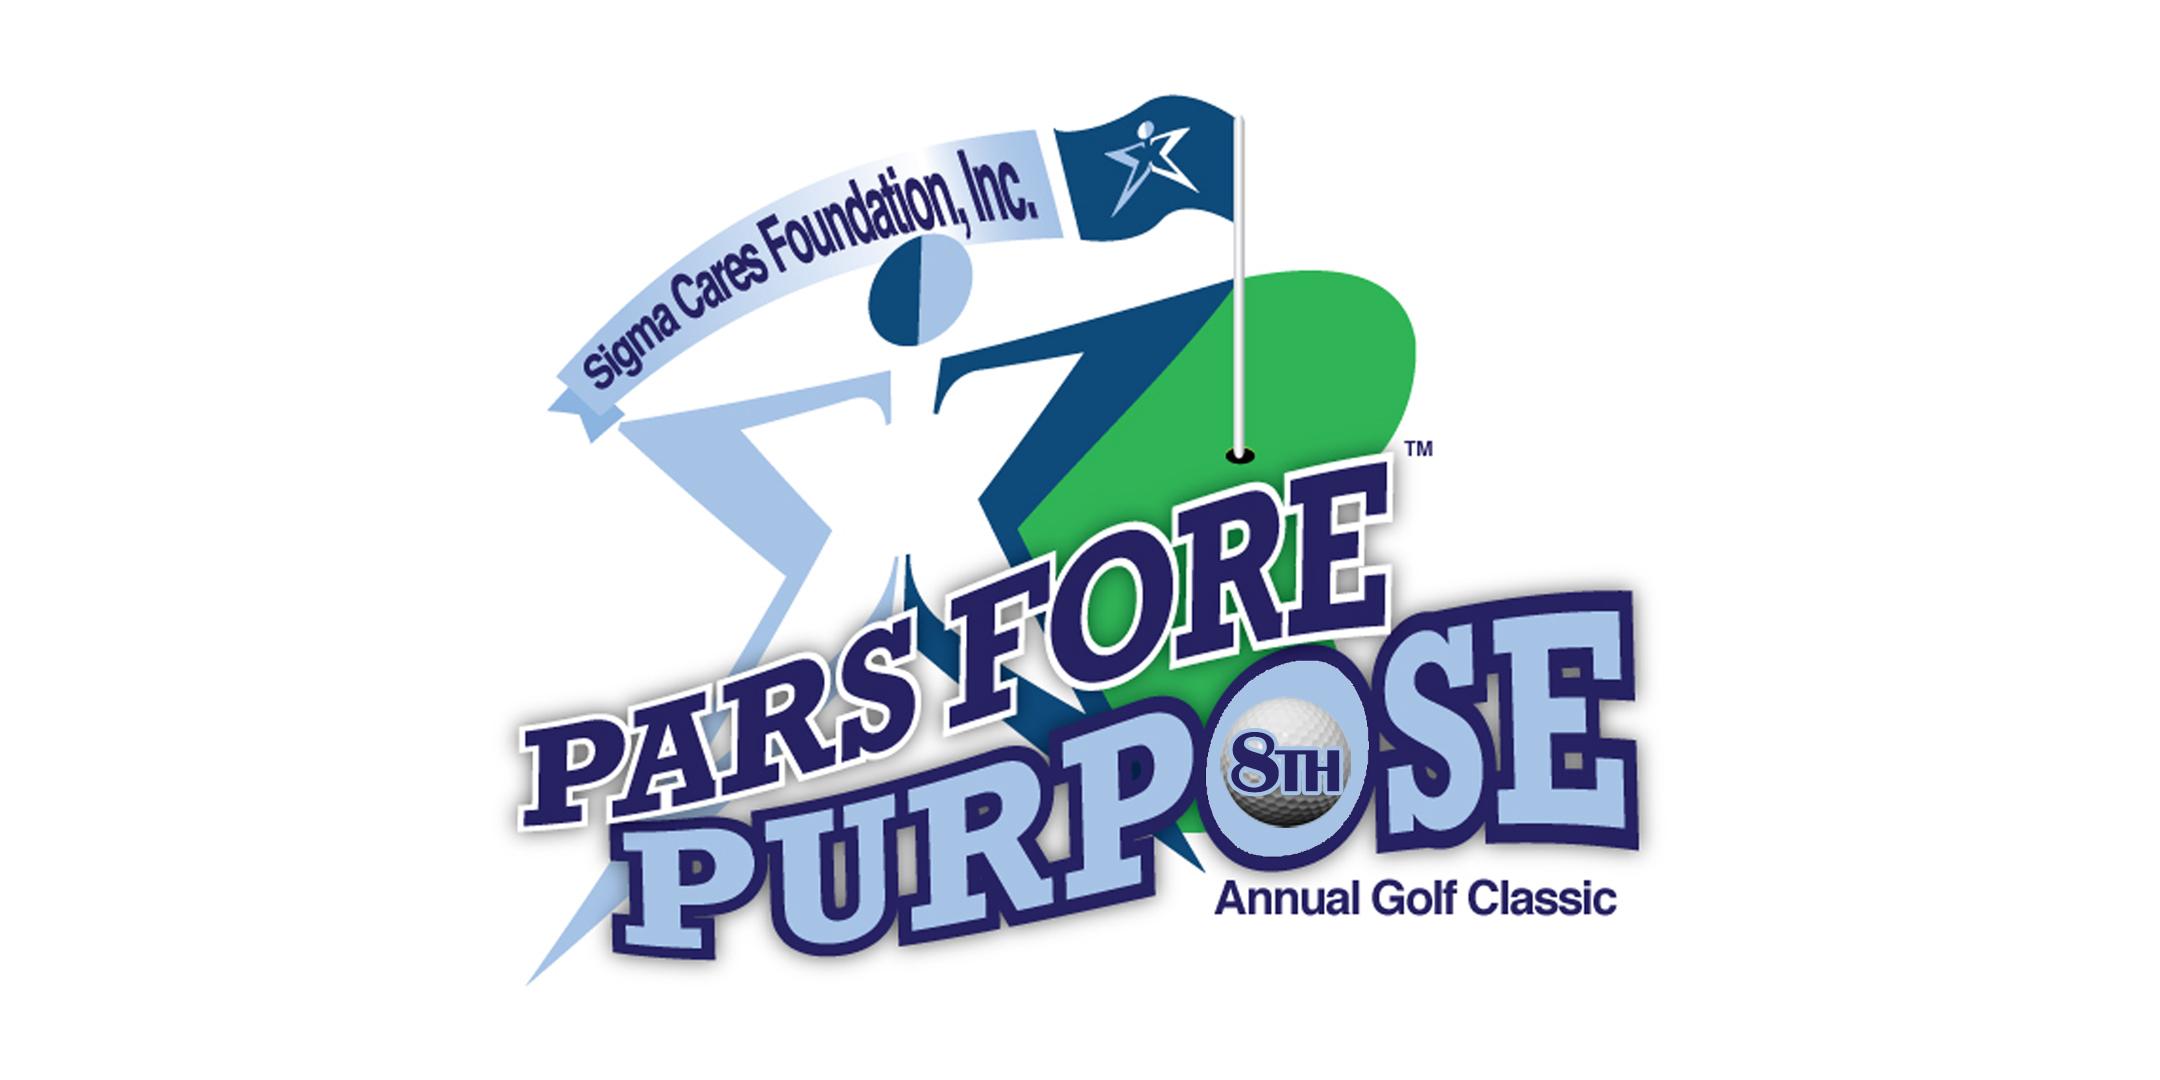 8th Annual Sigma Cares Foundation “Pars Fore Purpose” Golf Classic